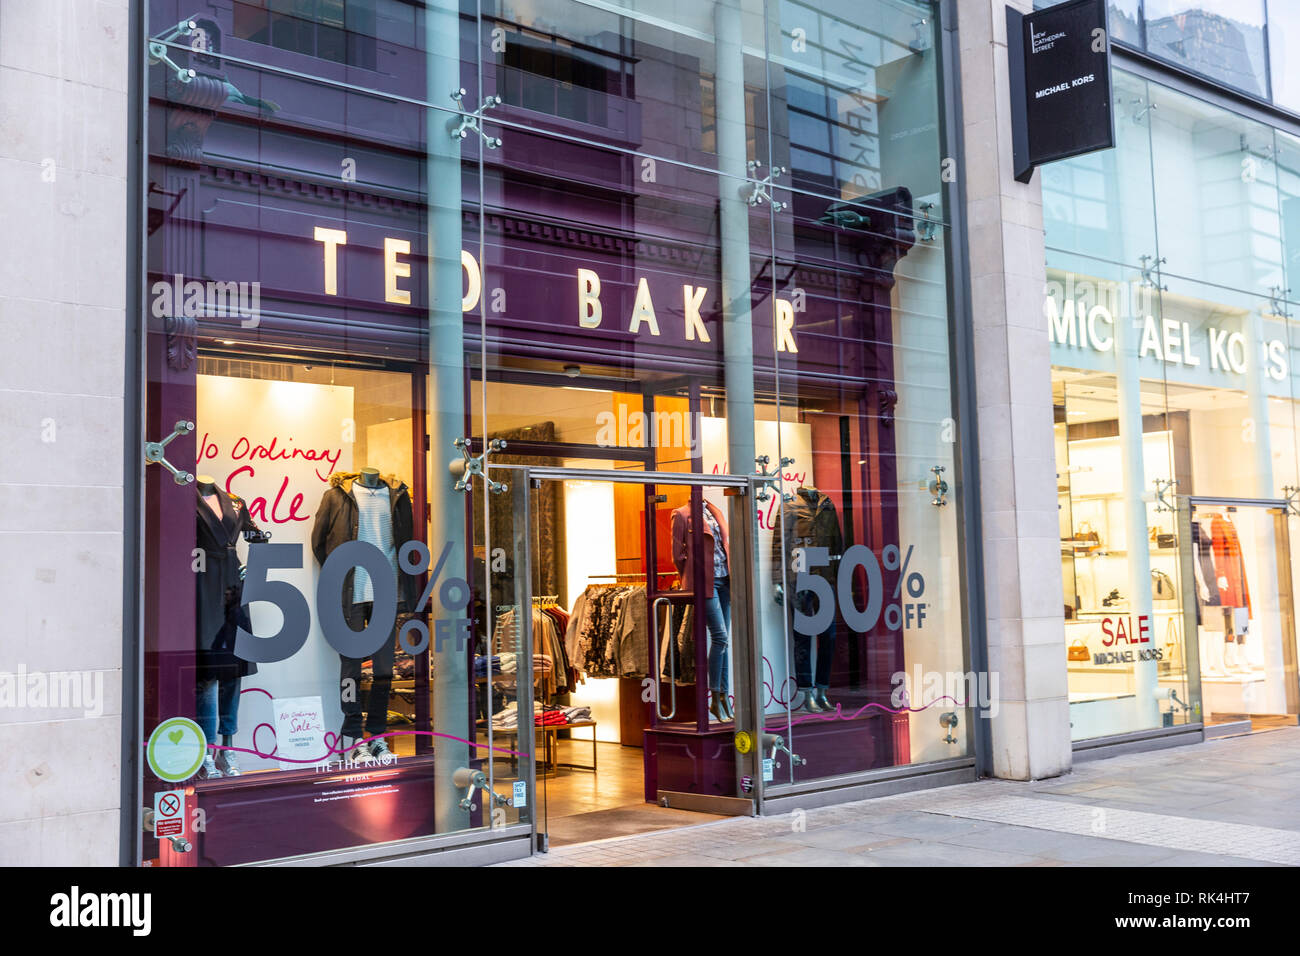 Ted Baker and Michael Kors stores and shopfronts in New Cathedral Street,Manchester city centre,England Stock Photo